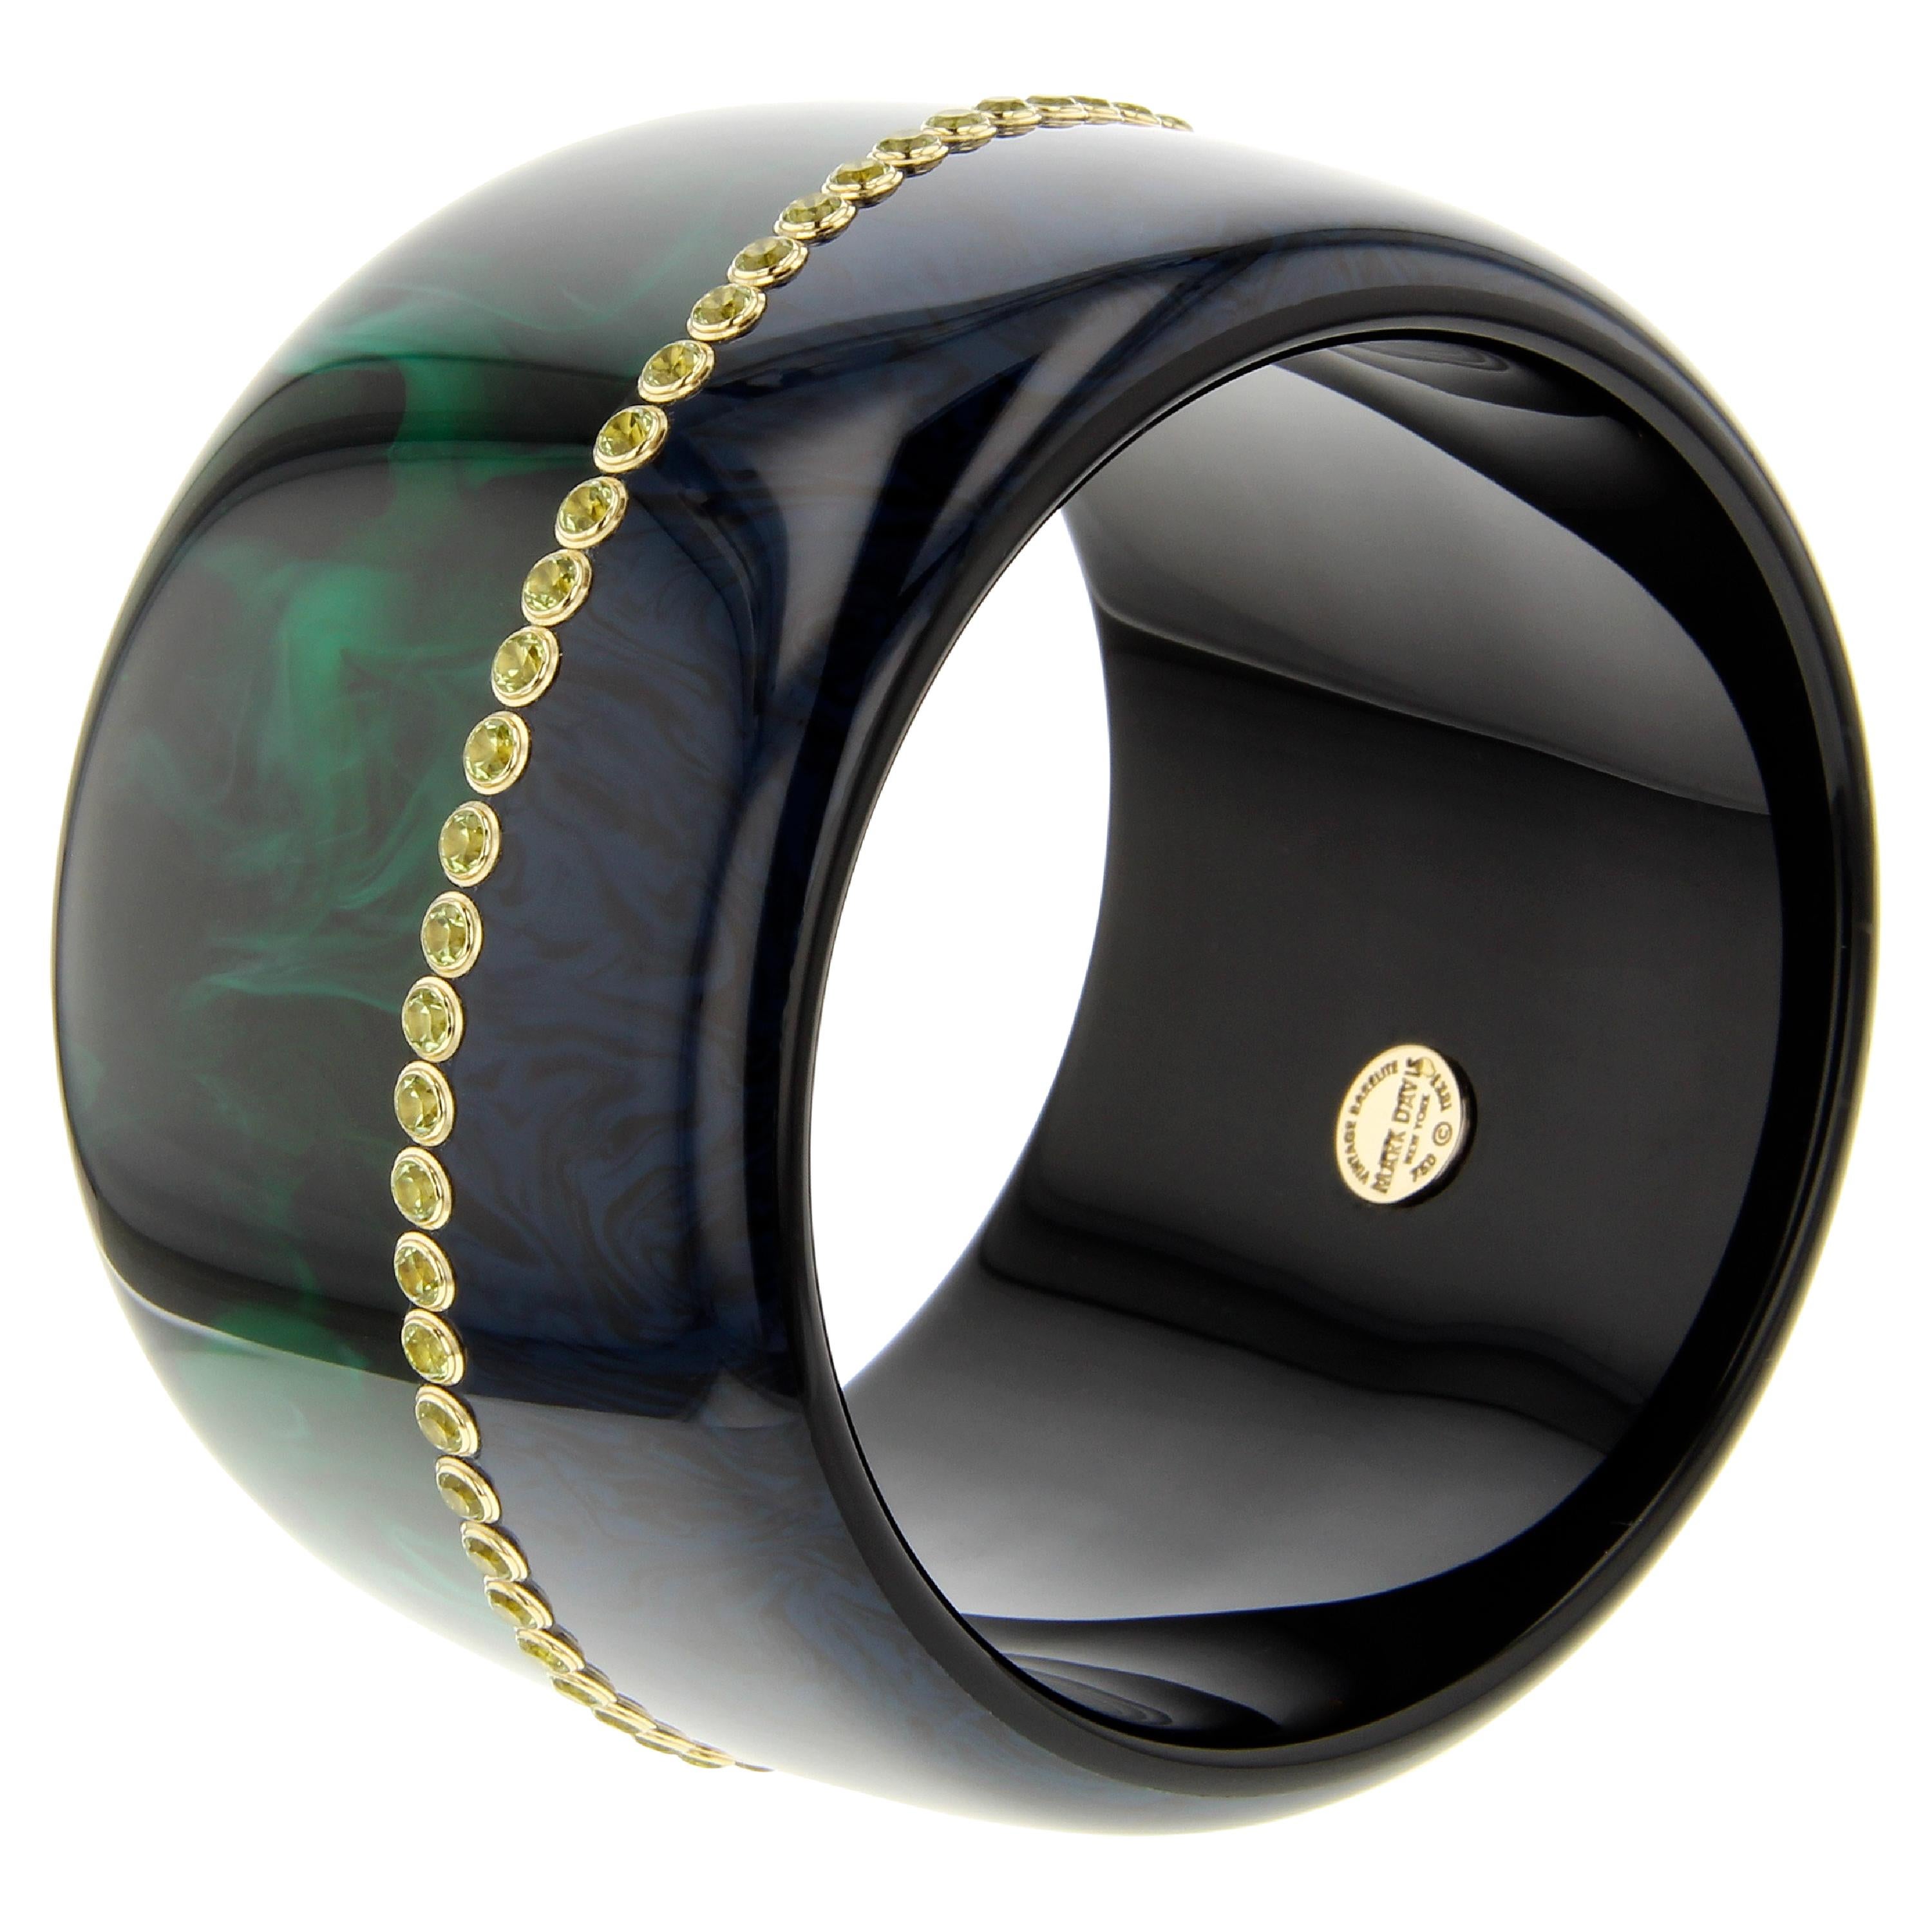 This bold Mark Davis bangle was created by seamlessly joining deep, marbled blue bakelite to an equally rich dark green, marbled bakelite. The asymmetrical border between the two colors has been set with tightly spaced, round peridot set in